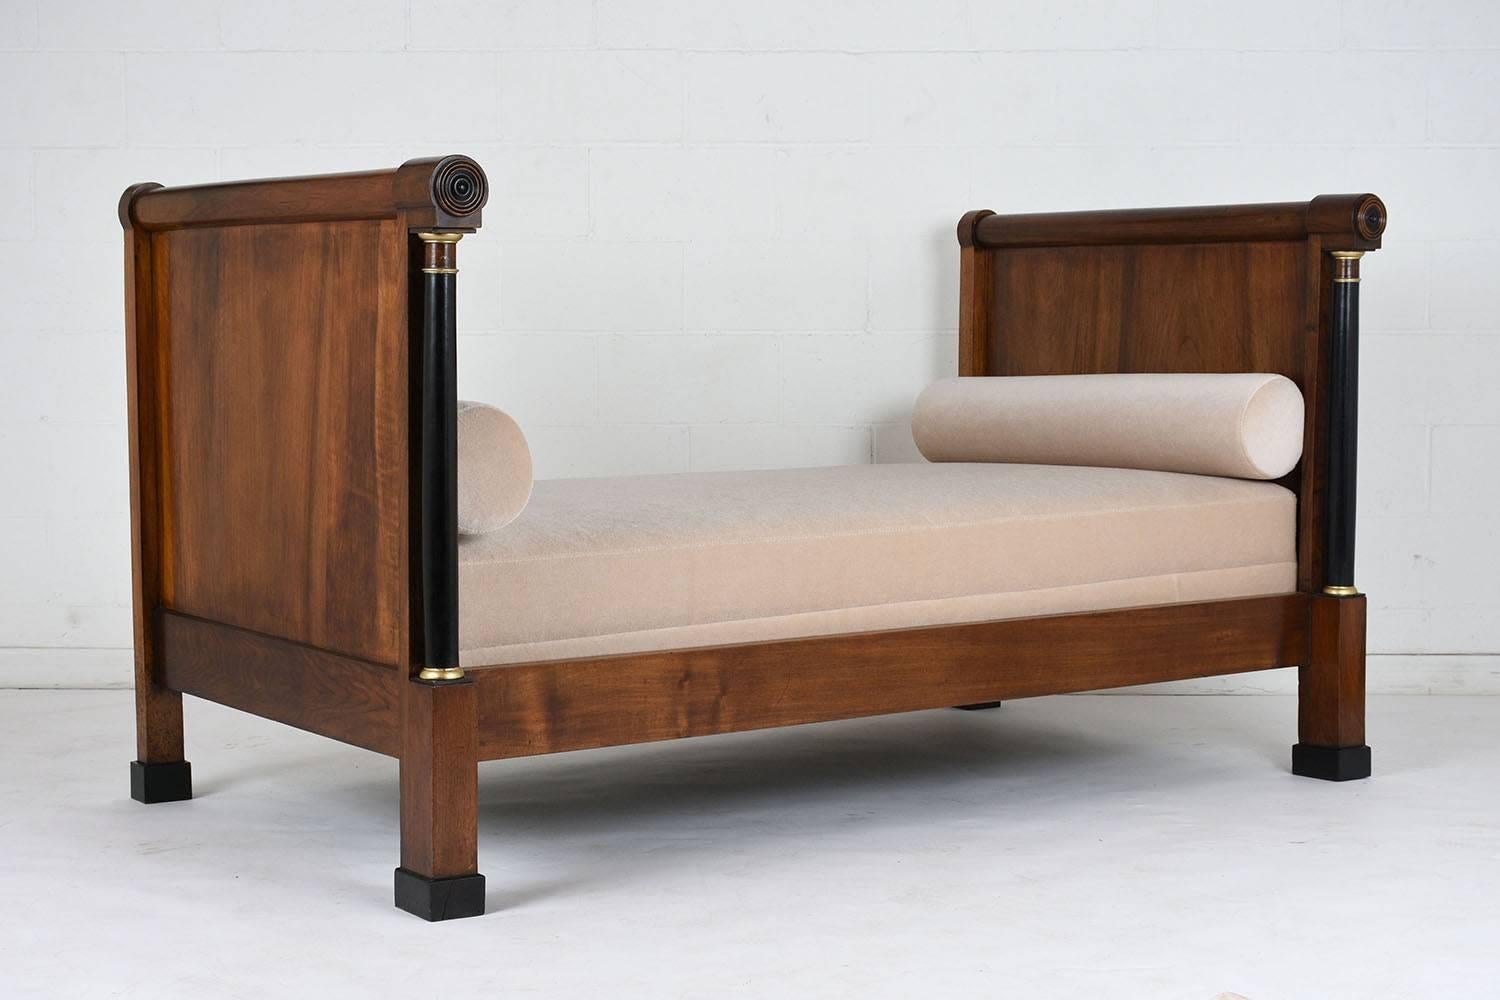 This 1830's French Empire-style daybed features a completely restored walnut wood frame stained a rich walnut color with black and gilt accents. The comfortable new mattress cushion is upholstered in a beige mohair velvet fabric with two matching